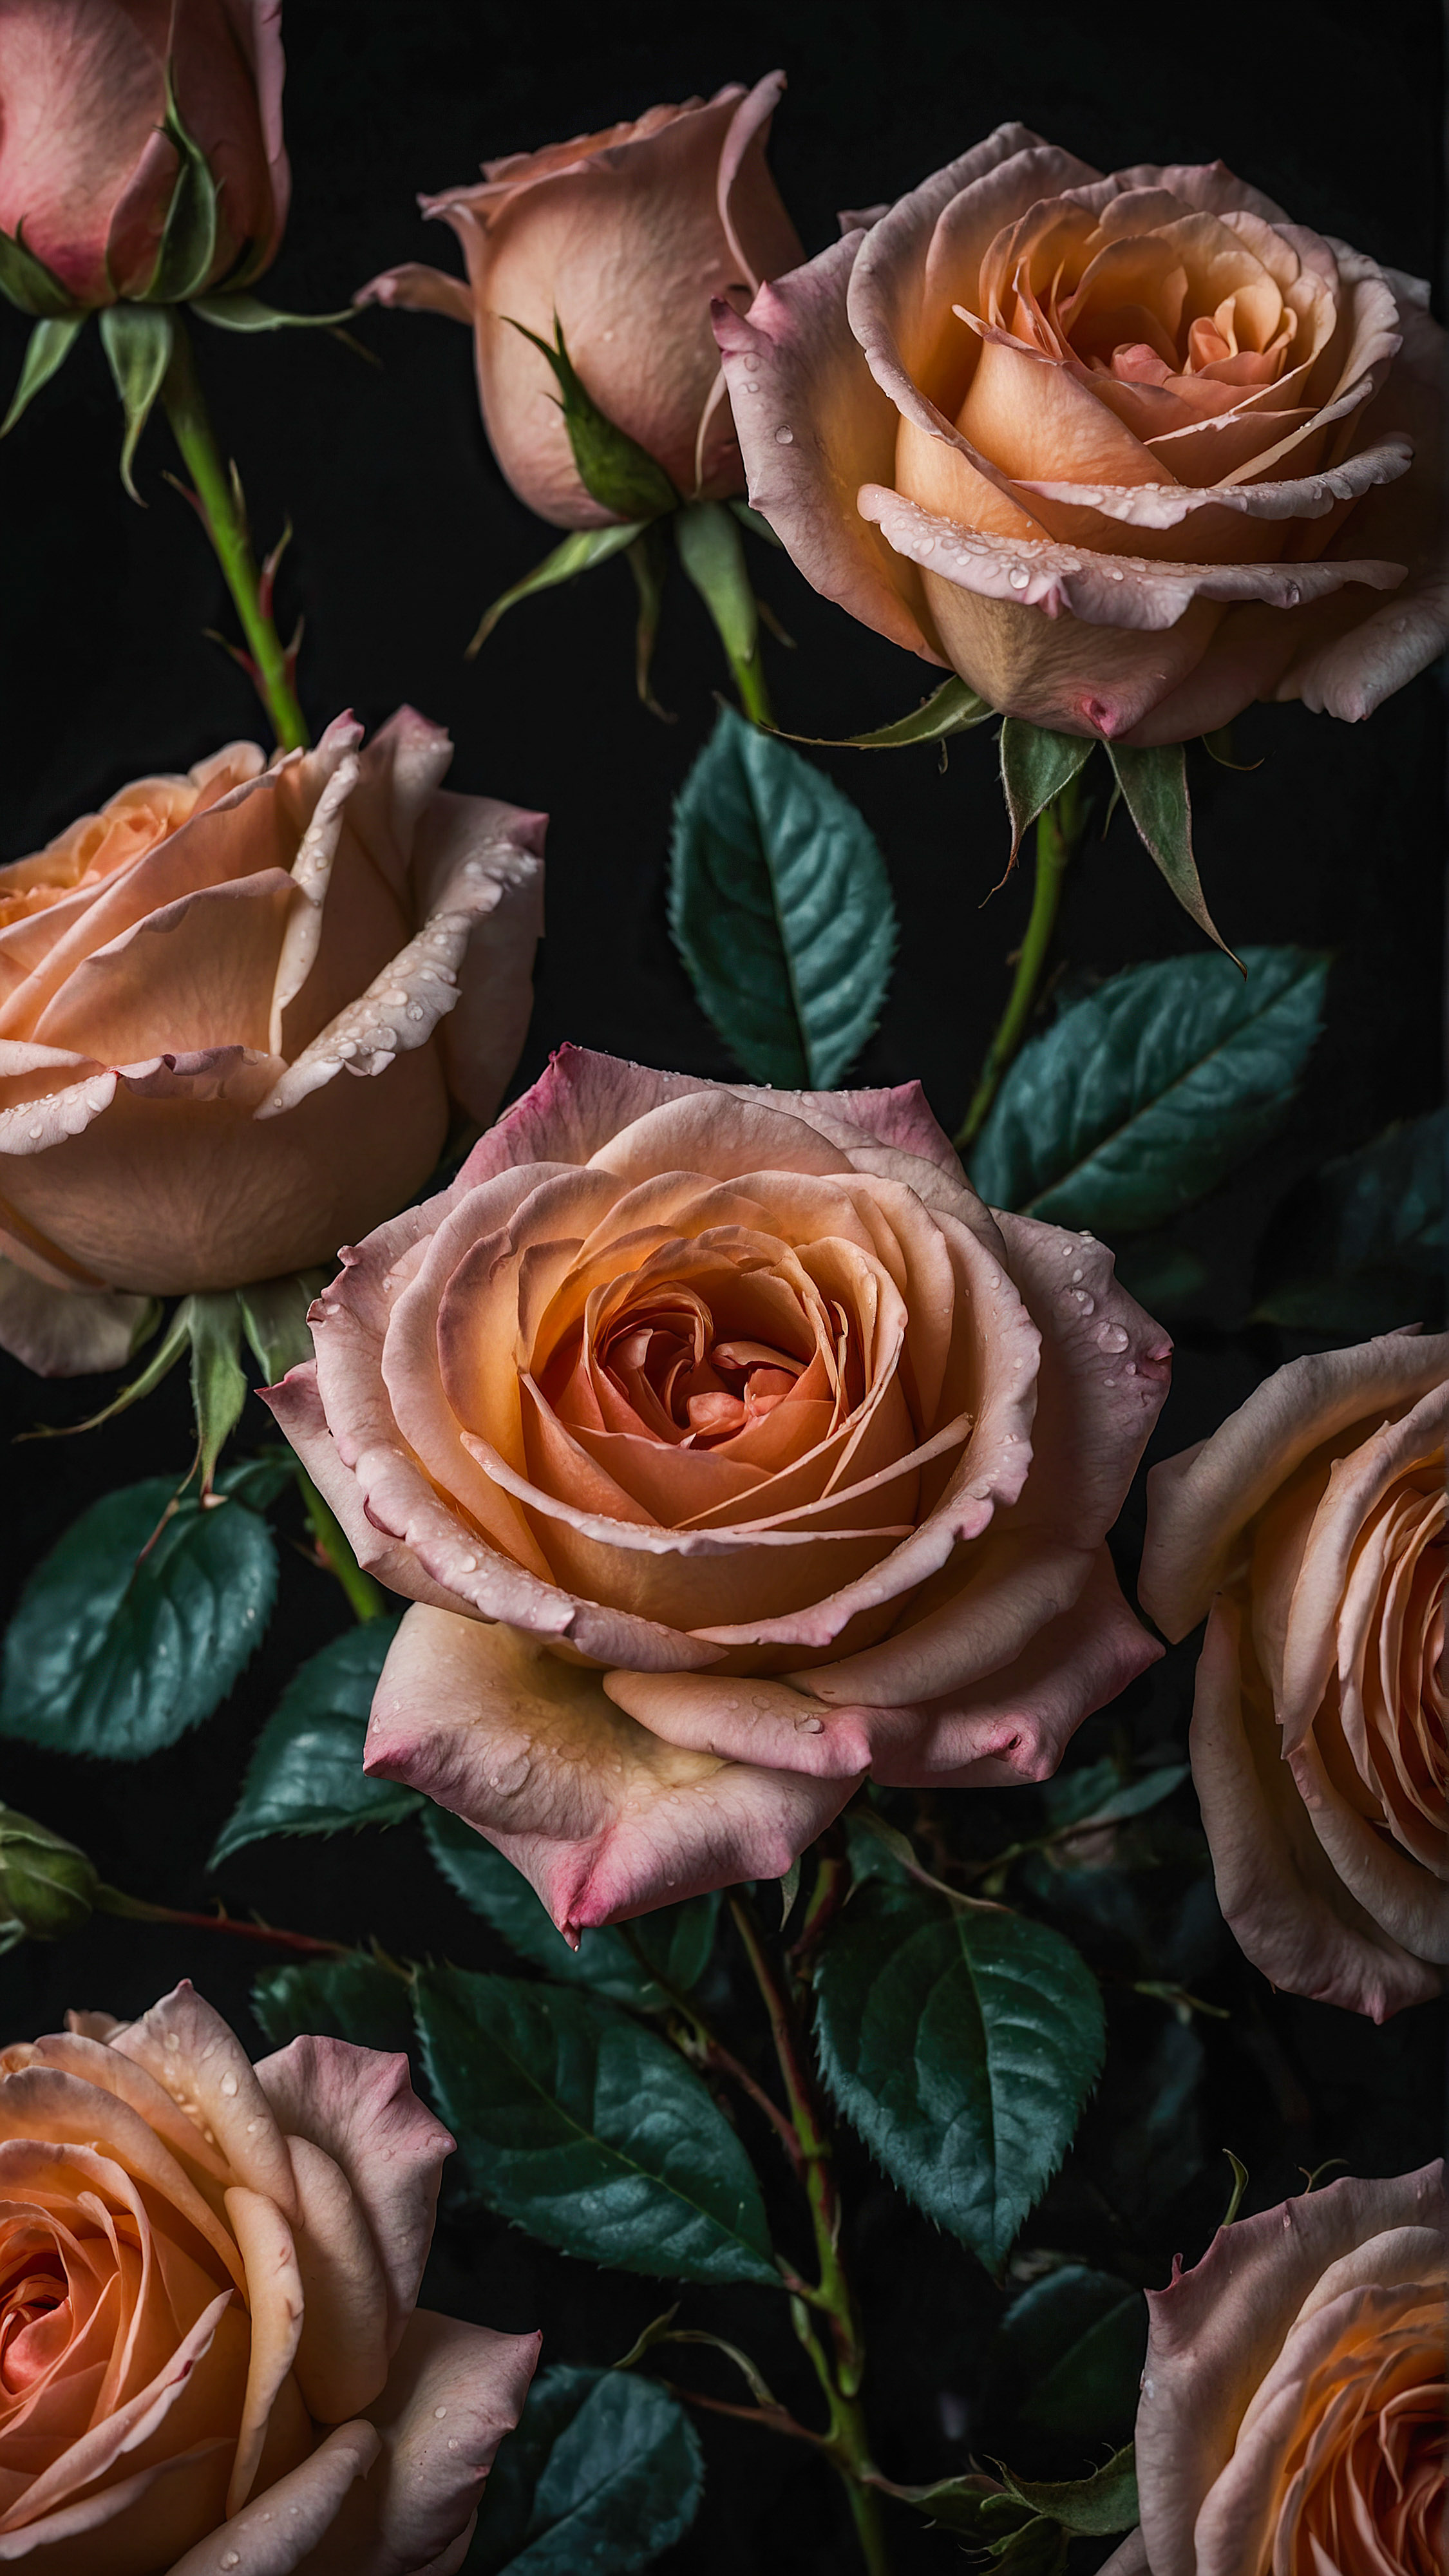 Admire the elegance of our pastel pink iPhone wallpaper, a close-up of elegant roses with soft, moody lighting that highlights their intricate petals and leaves on a black background.